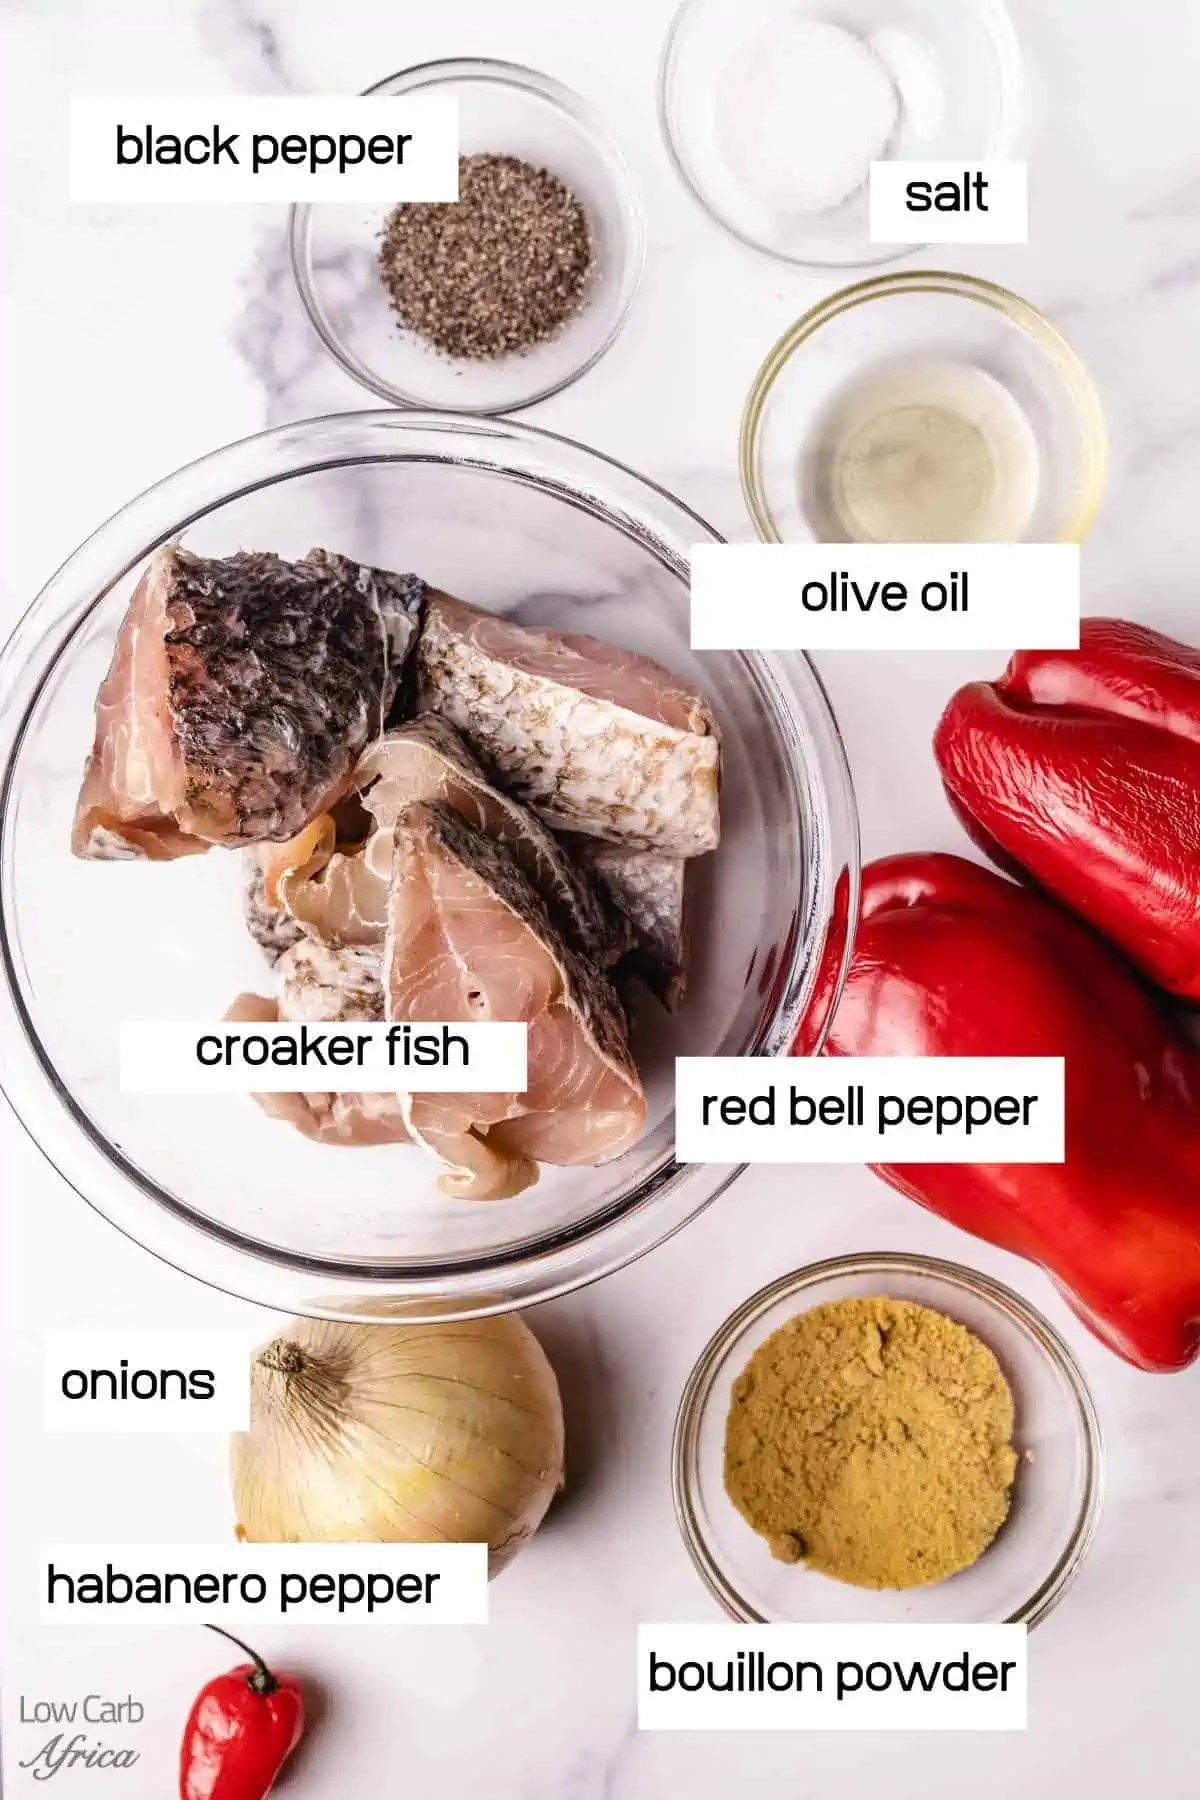 ingredients to make croaker fish including oil, spices, red bell pepper, onion, and habanero pepper.